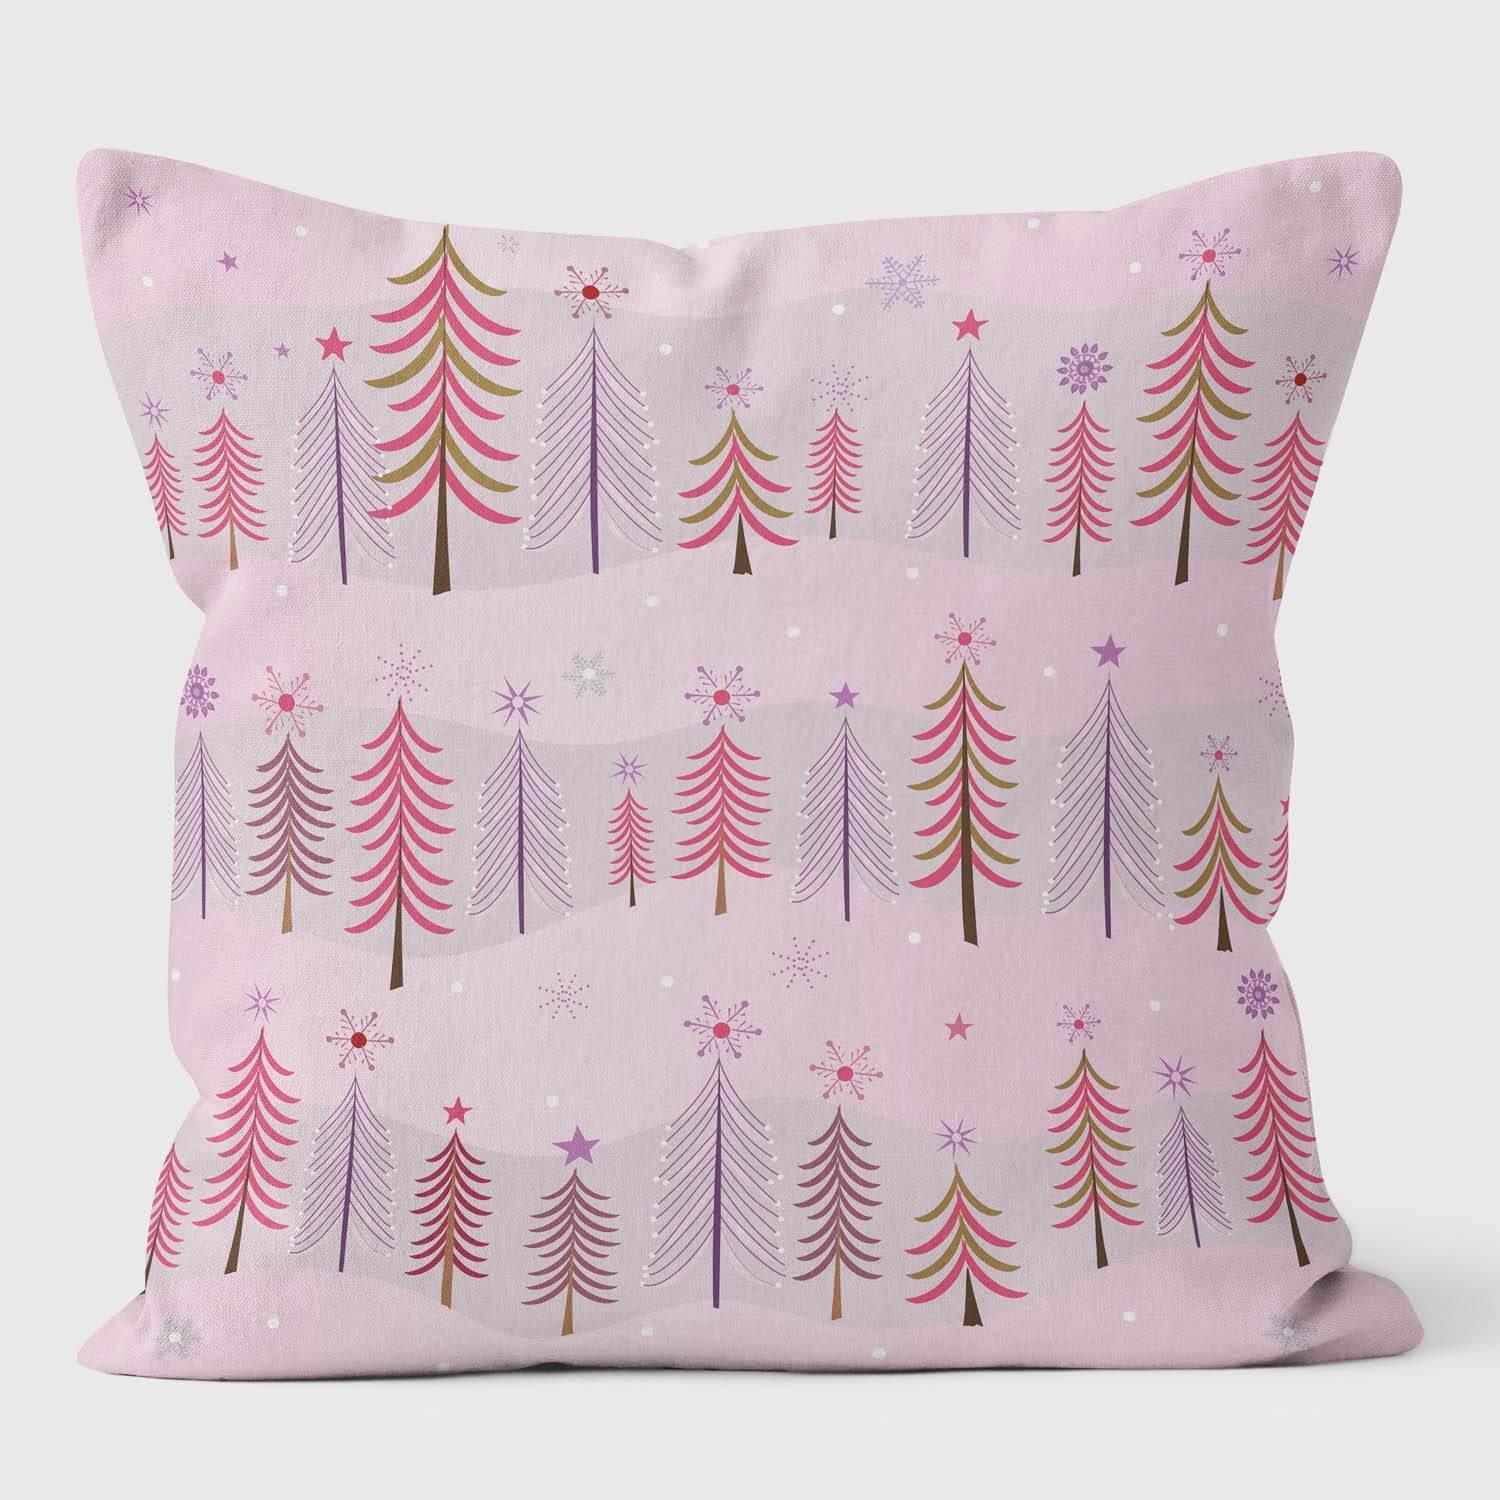 Christmas Treescape Candy Pink - House Of Turnowsky Cushion - Handmade Cushions UK - WeLoveCushions